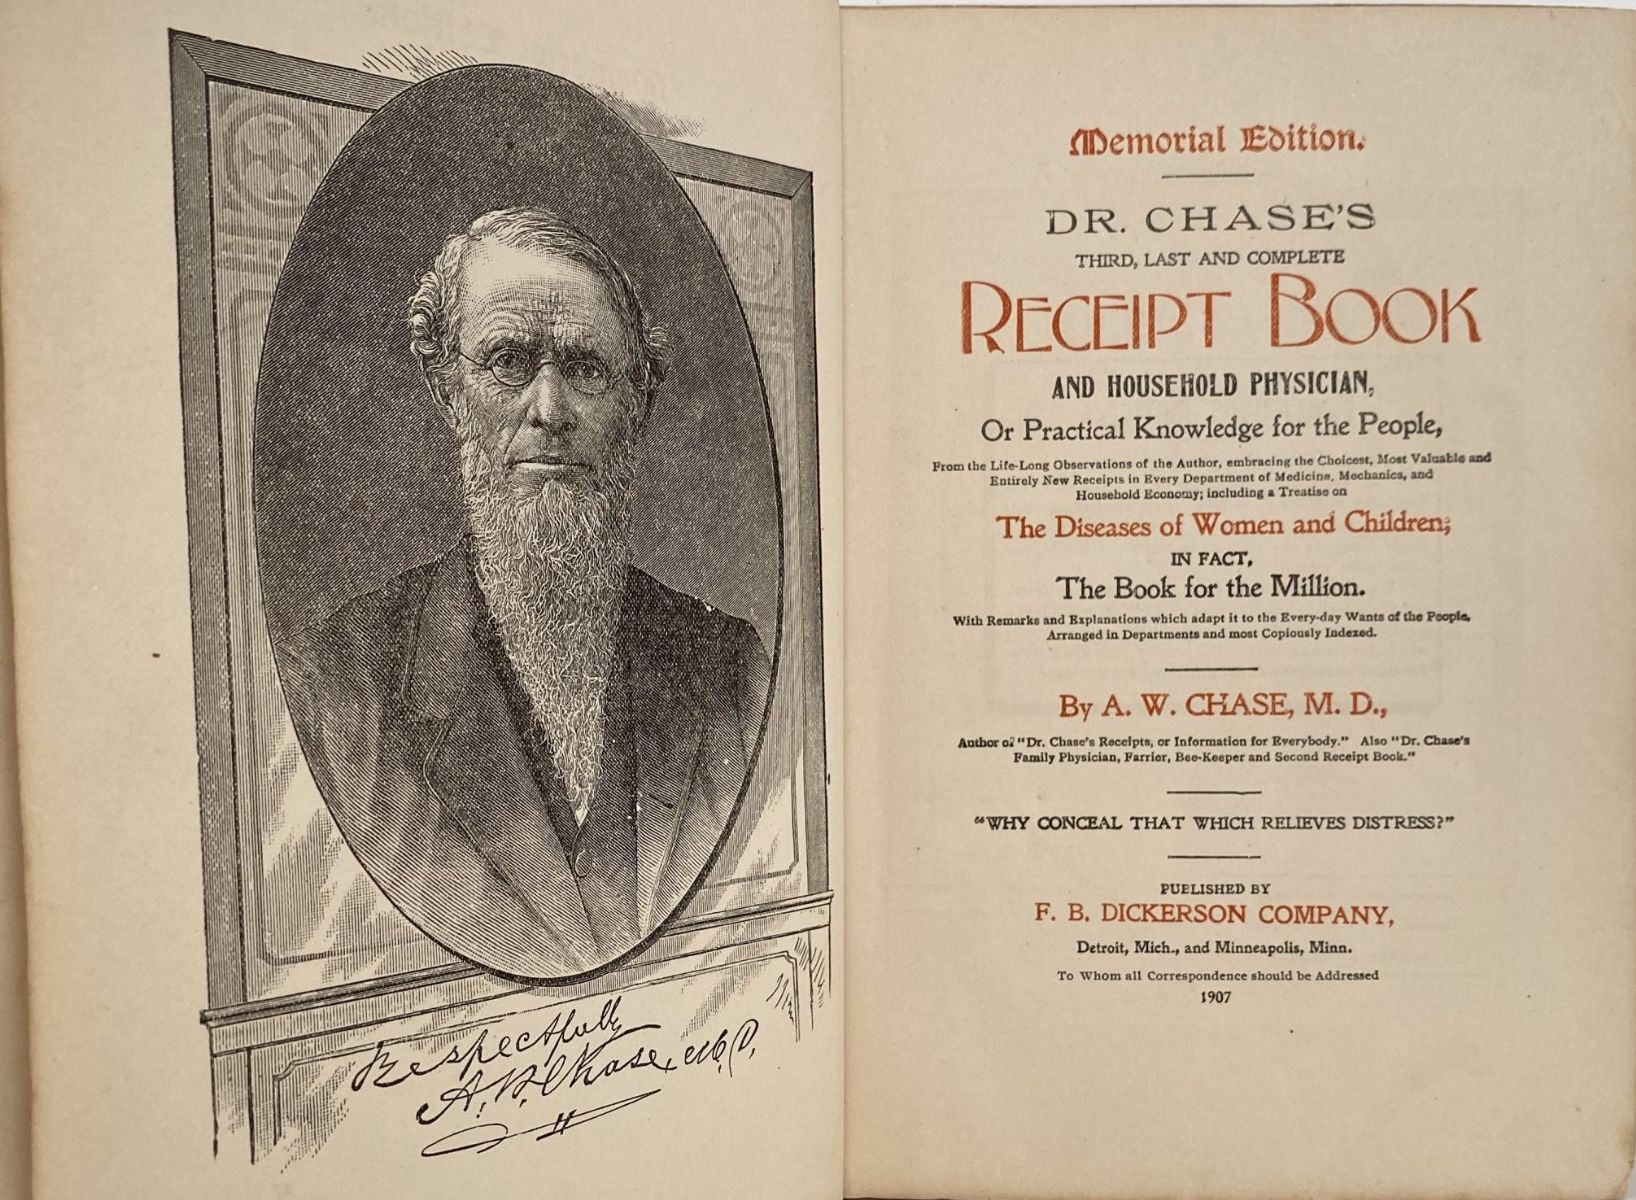 Dr. Chase's third last and complete RECEIPT BOOK and HOUSEHOLD PHYSICIAN